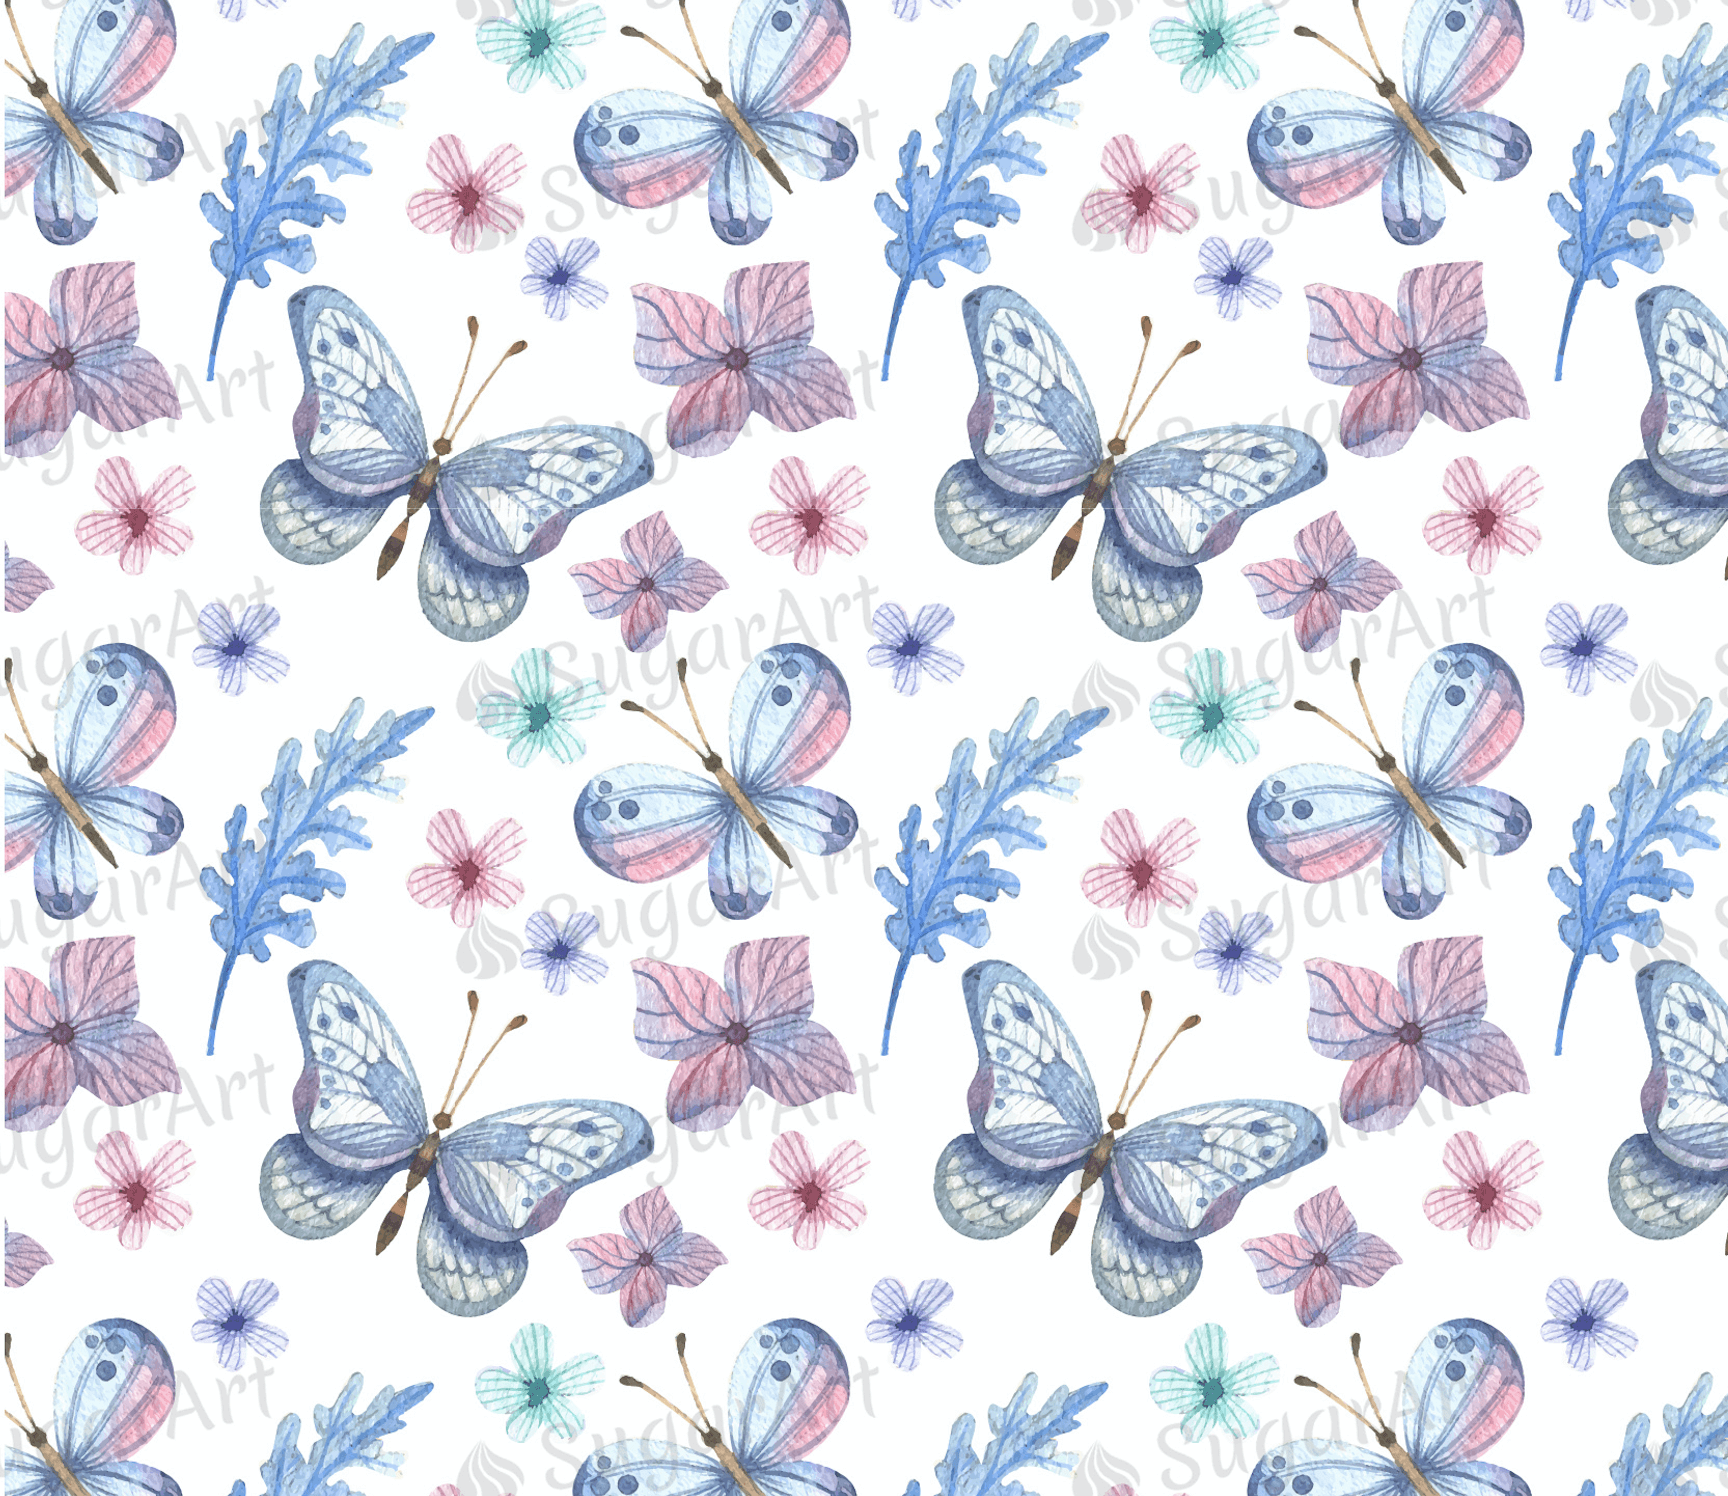 Elegant Pattern of Flowers and Butterflies - Icing - ISA033.